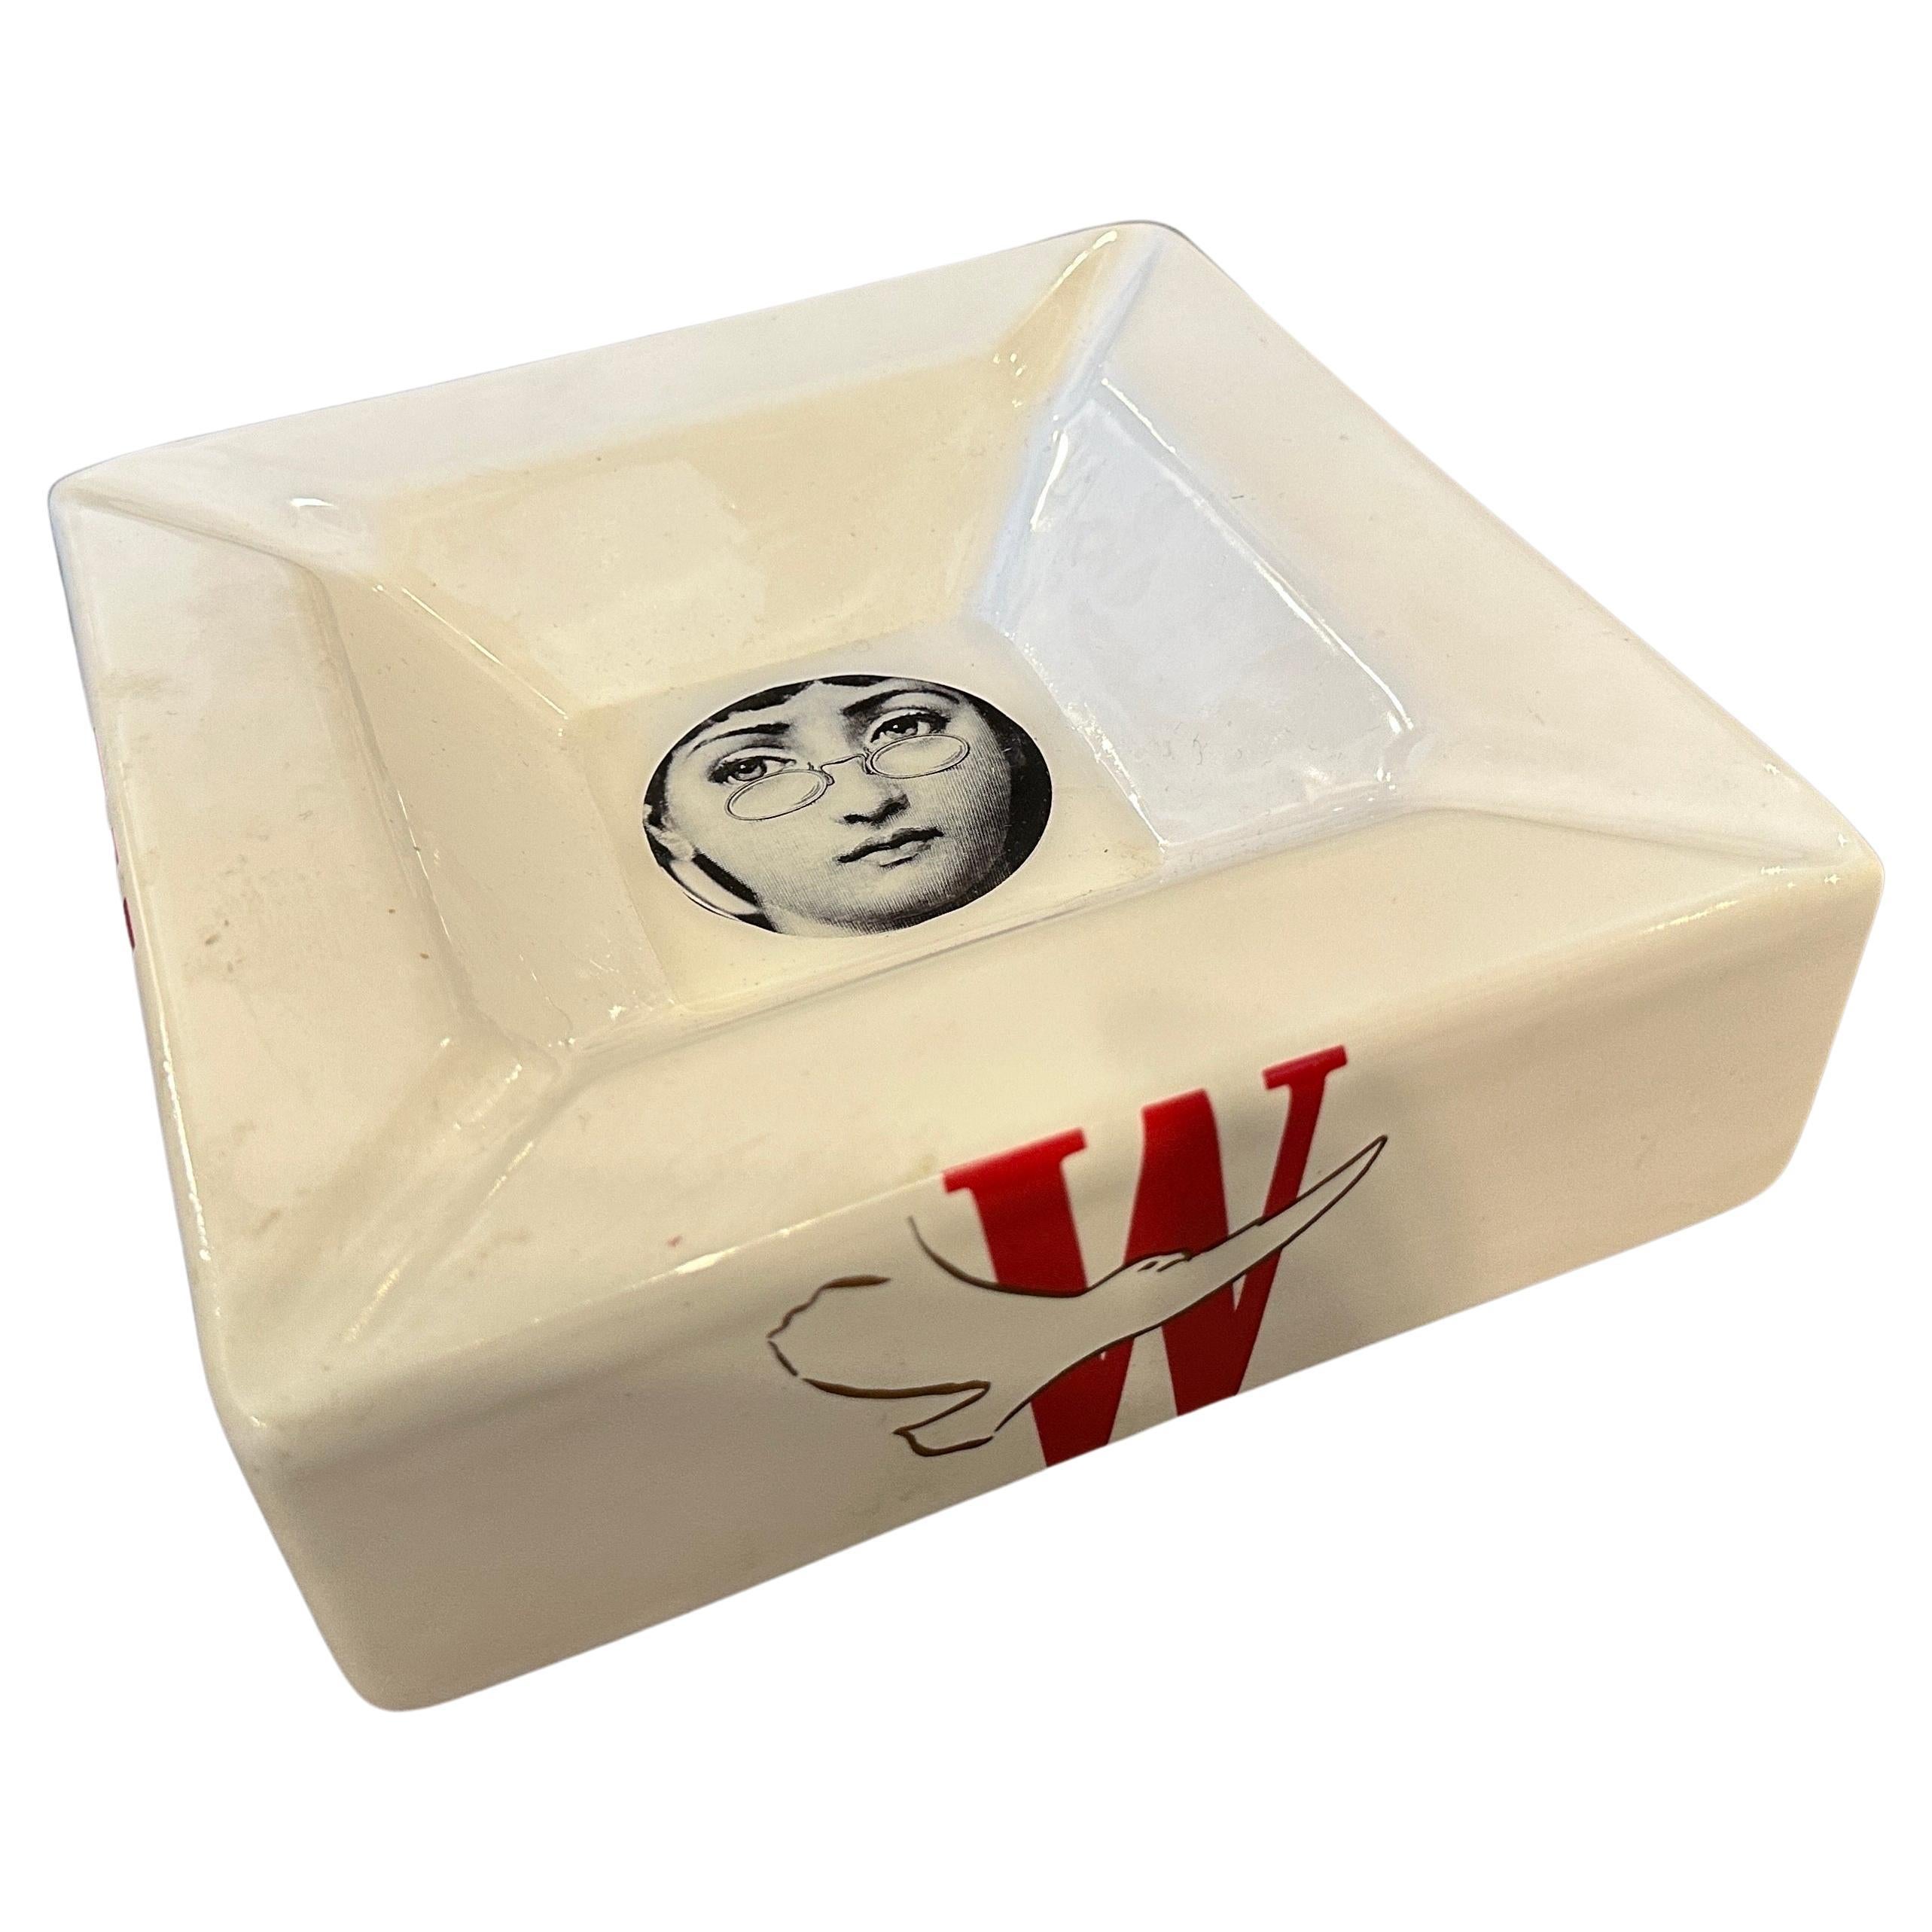 A square white ceramic ashtray designed and manufactured by Fornasetti for Winston cigarettes, it features the famous woman's face that we see in many variations of her iconic illustrations, the opera singer Lina Cavalieri. It's in lovely